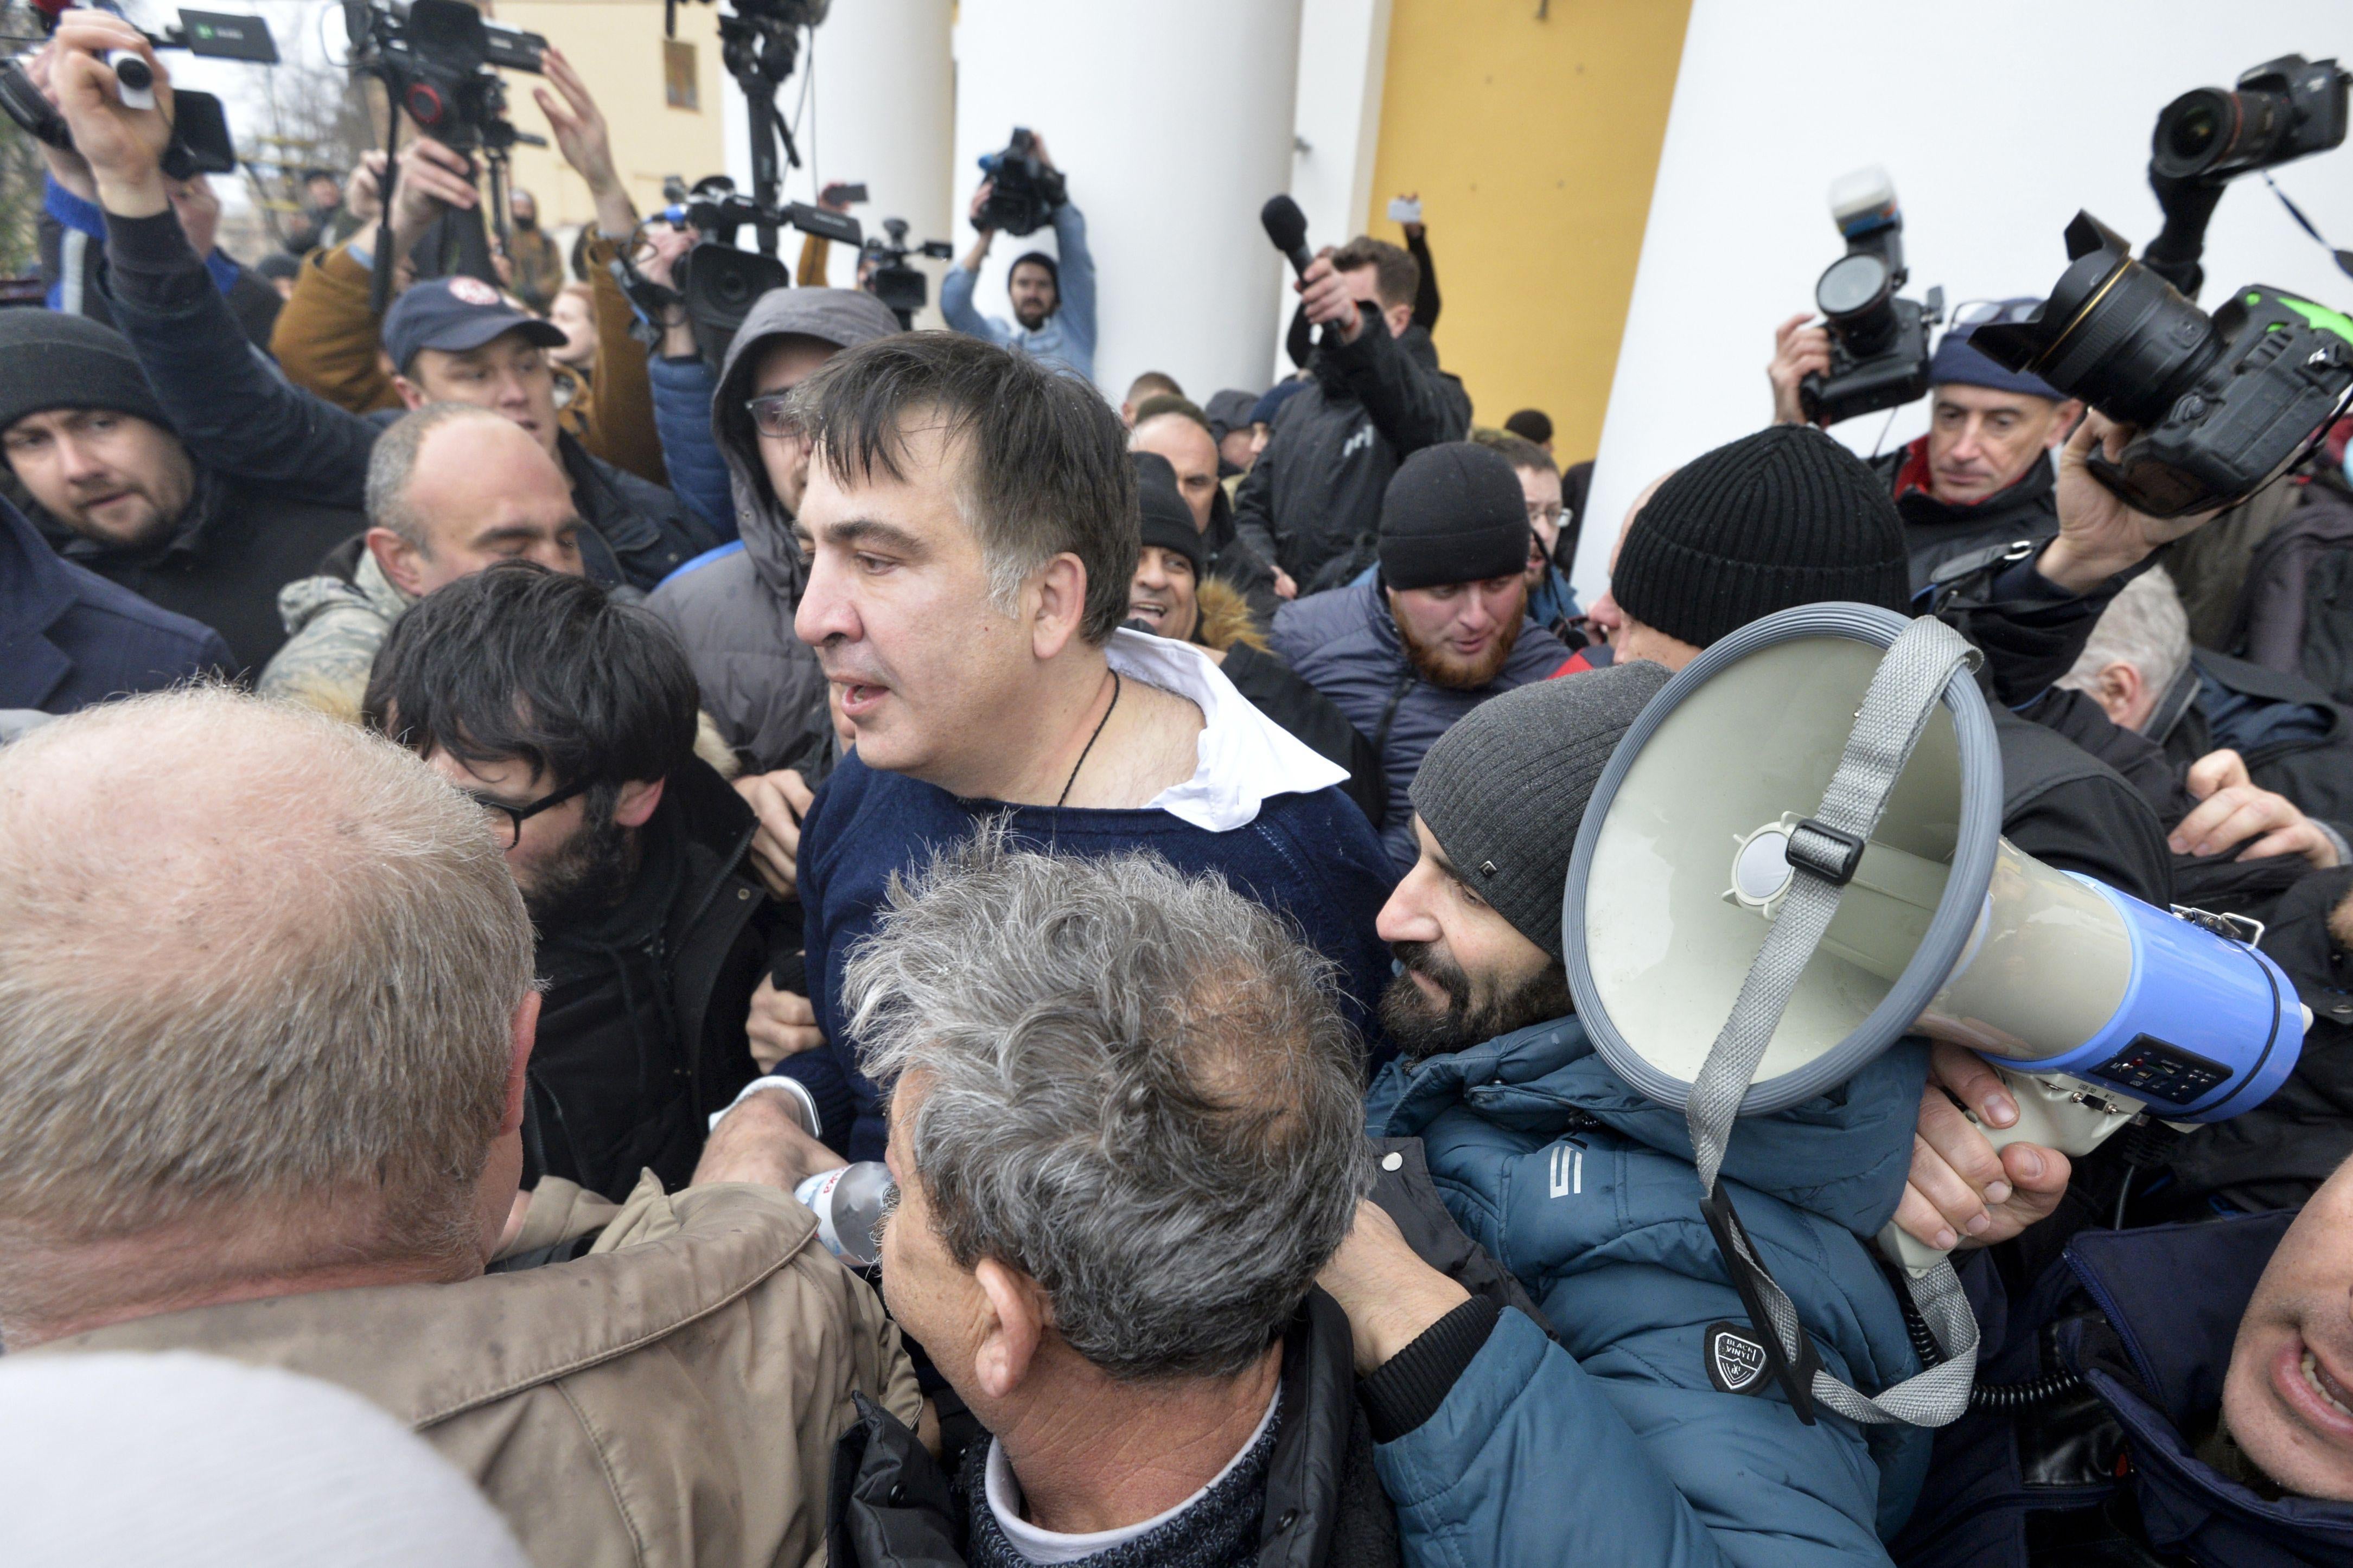 TOPSHOT - Former Georgian Mikheil Saakashvili (C-L) is seen after he was released by his supporters in downtown Kiev on December 5, 2017.
Ukrainian security services on December 5 arrested former Georgian president Mikheil Saakashvili after he climbed onto the roof of his apartment building and addressed supporters during a police raid. The Ukrainian Security Service (SBU) said Saakashvili had been arrested on charges of assisting criminal organisations. / AFP PHOTO / Sergei CHUZAVKOV        (Photo credit should read SERGEI CHUZAVKOV/AFP/Getty Images)